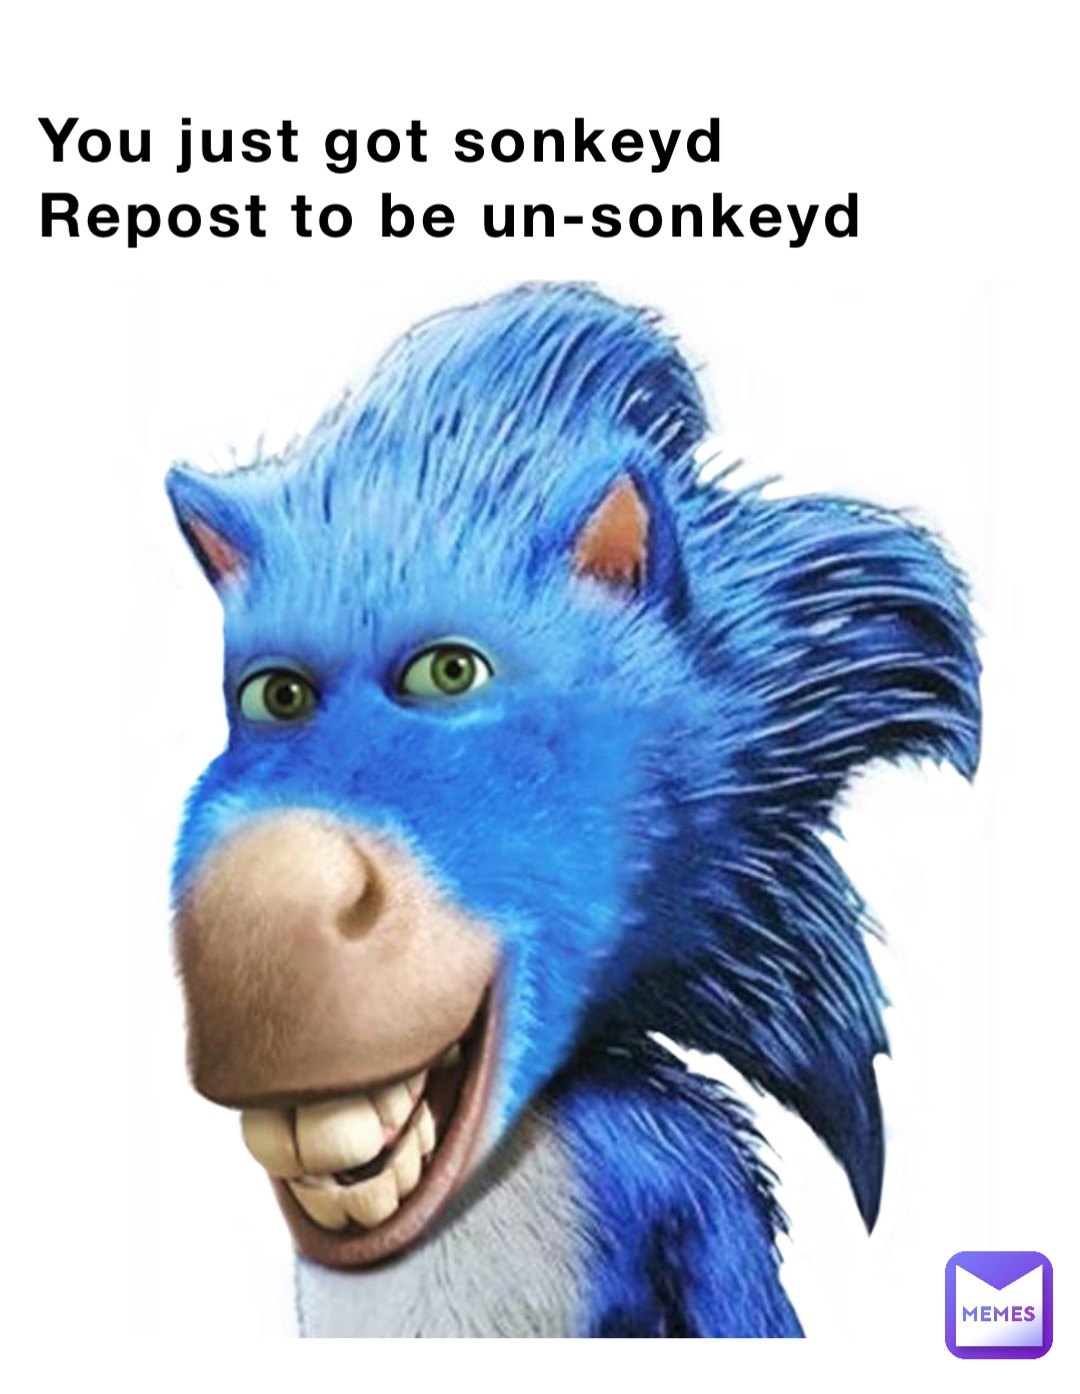 You just got sonkeyd
Repost to be un-sonkeyd